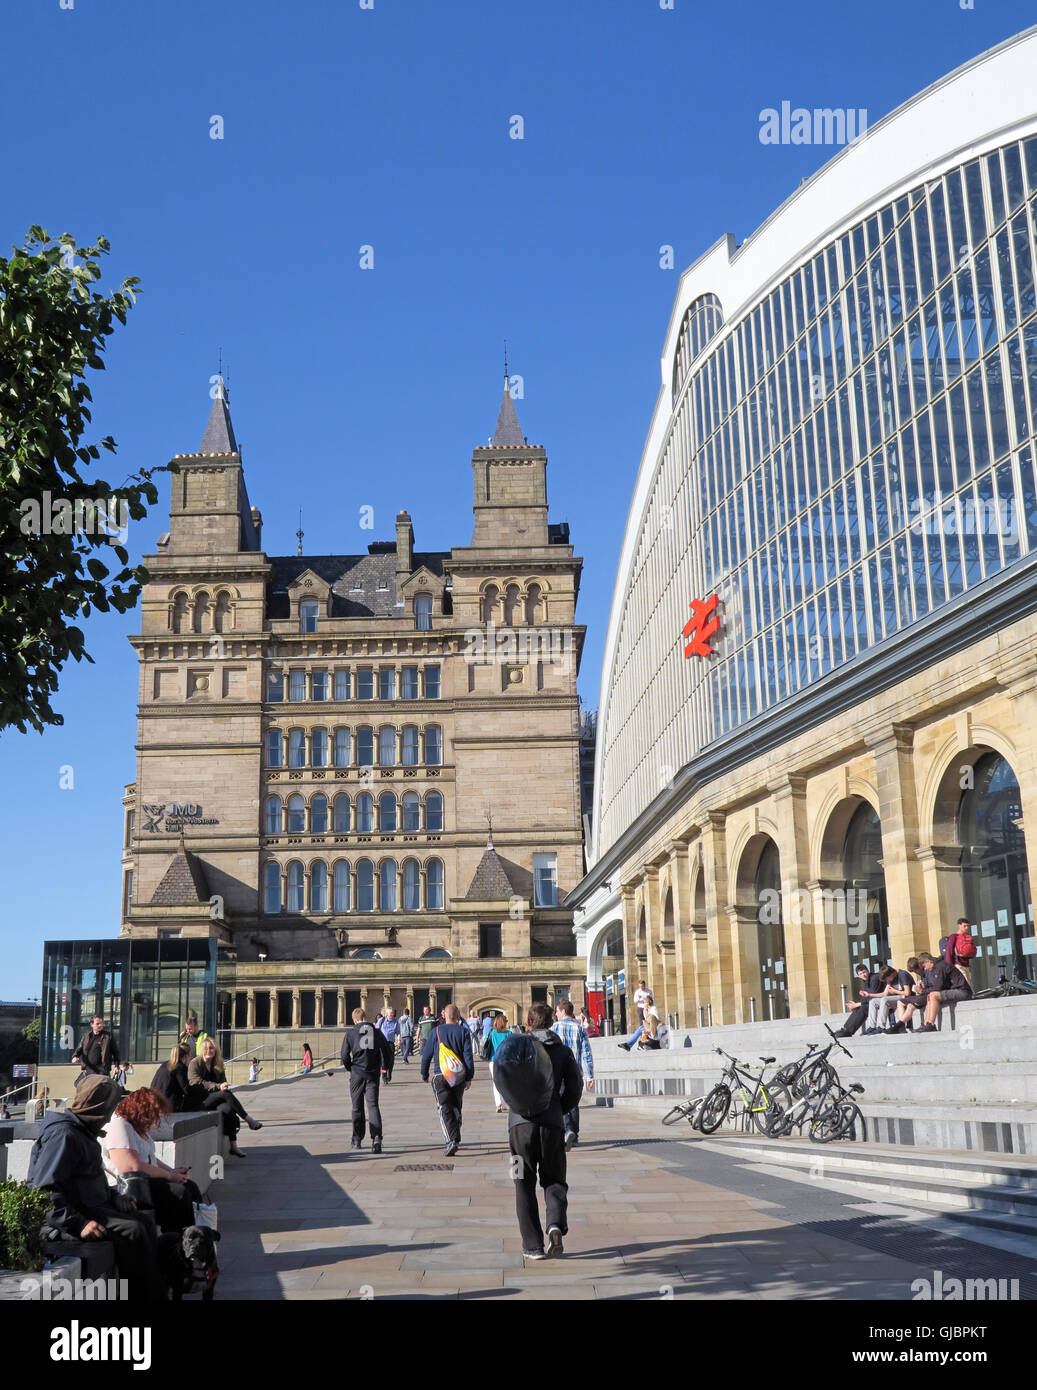 Approach to Lime Street mainline railway station, Liverpool, North West England, L1 1JD Stock Photo